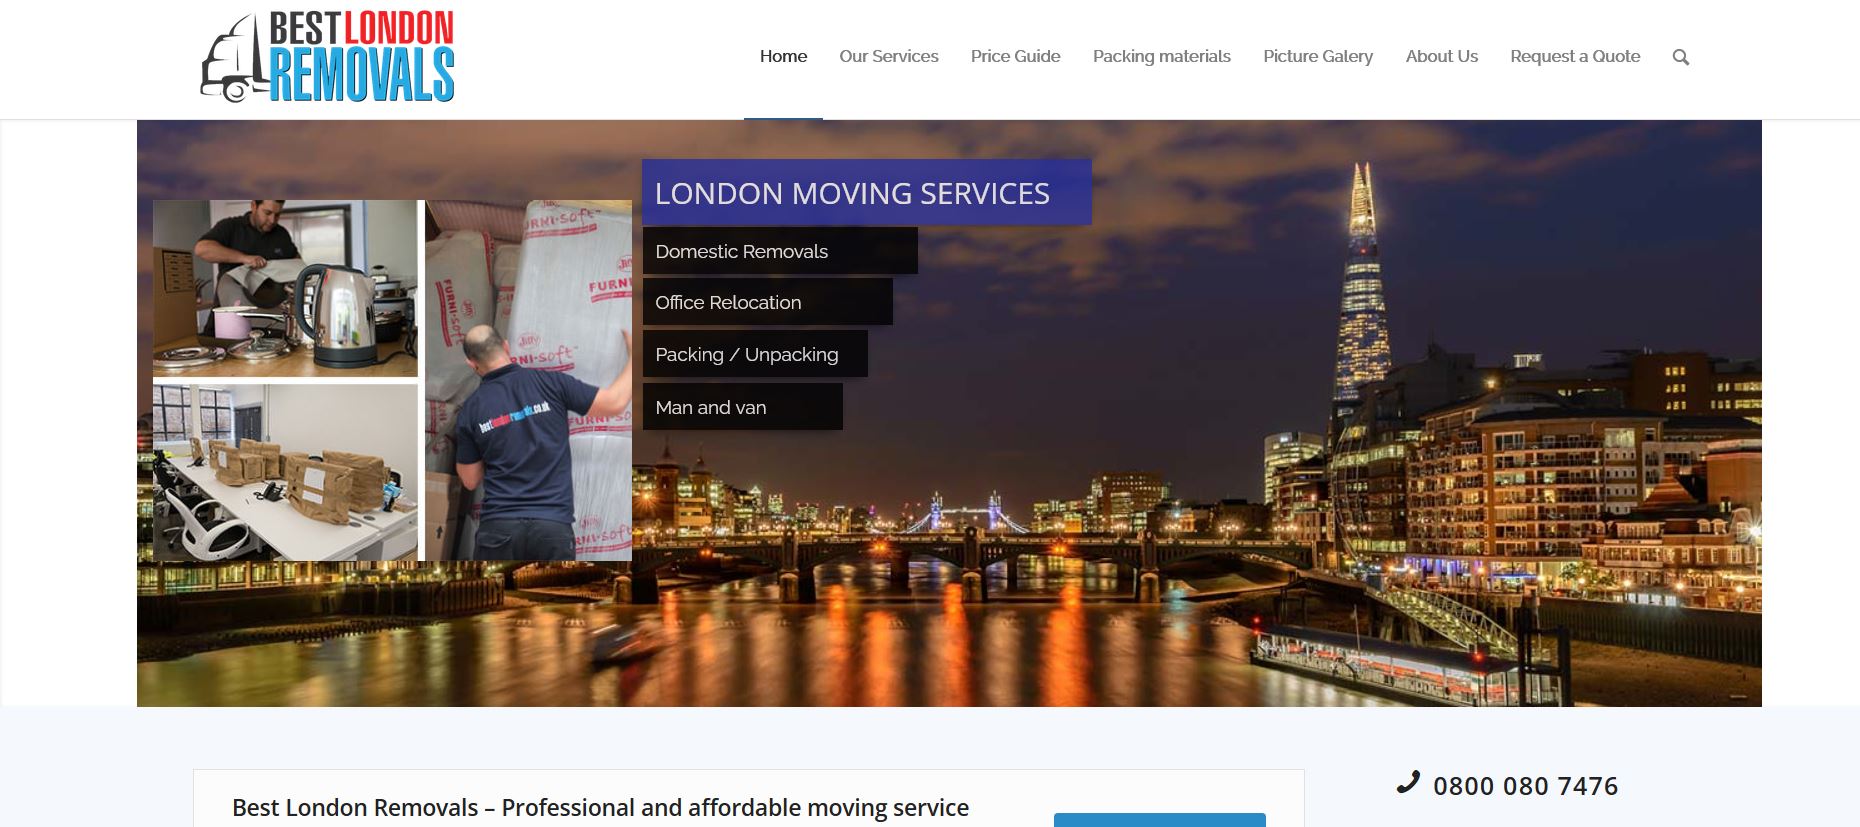 Best London Removals